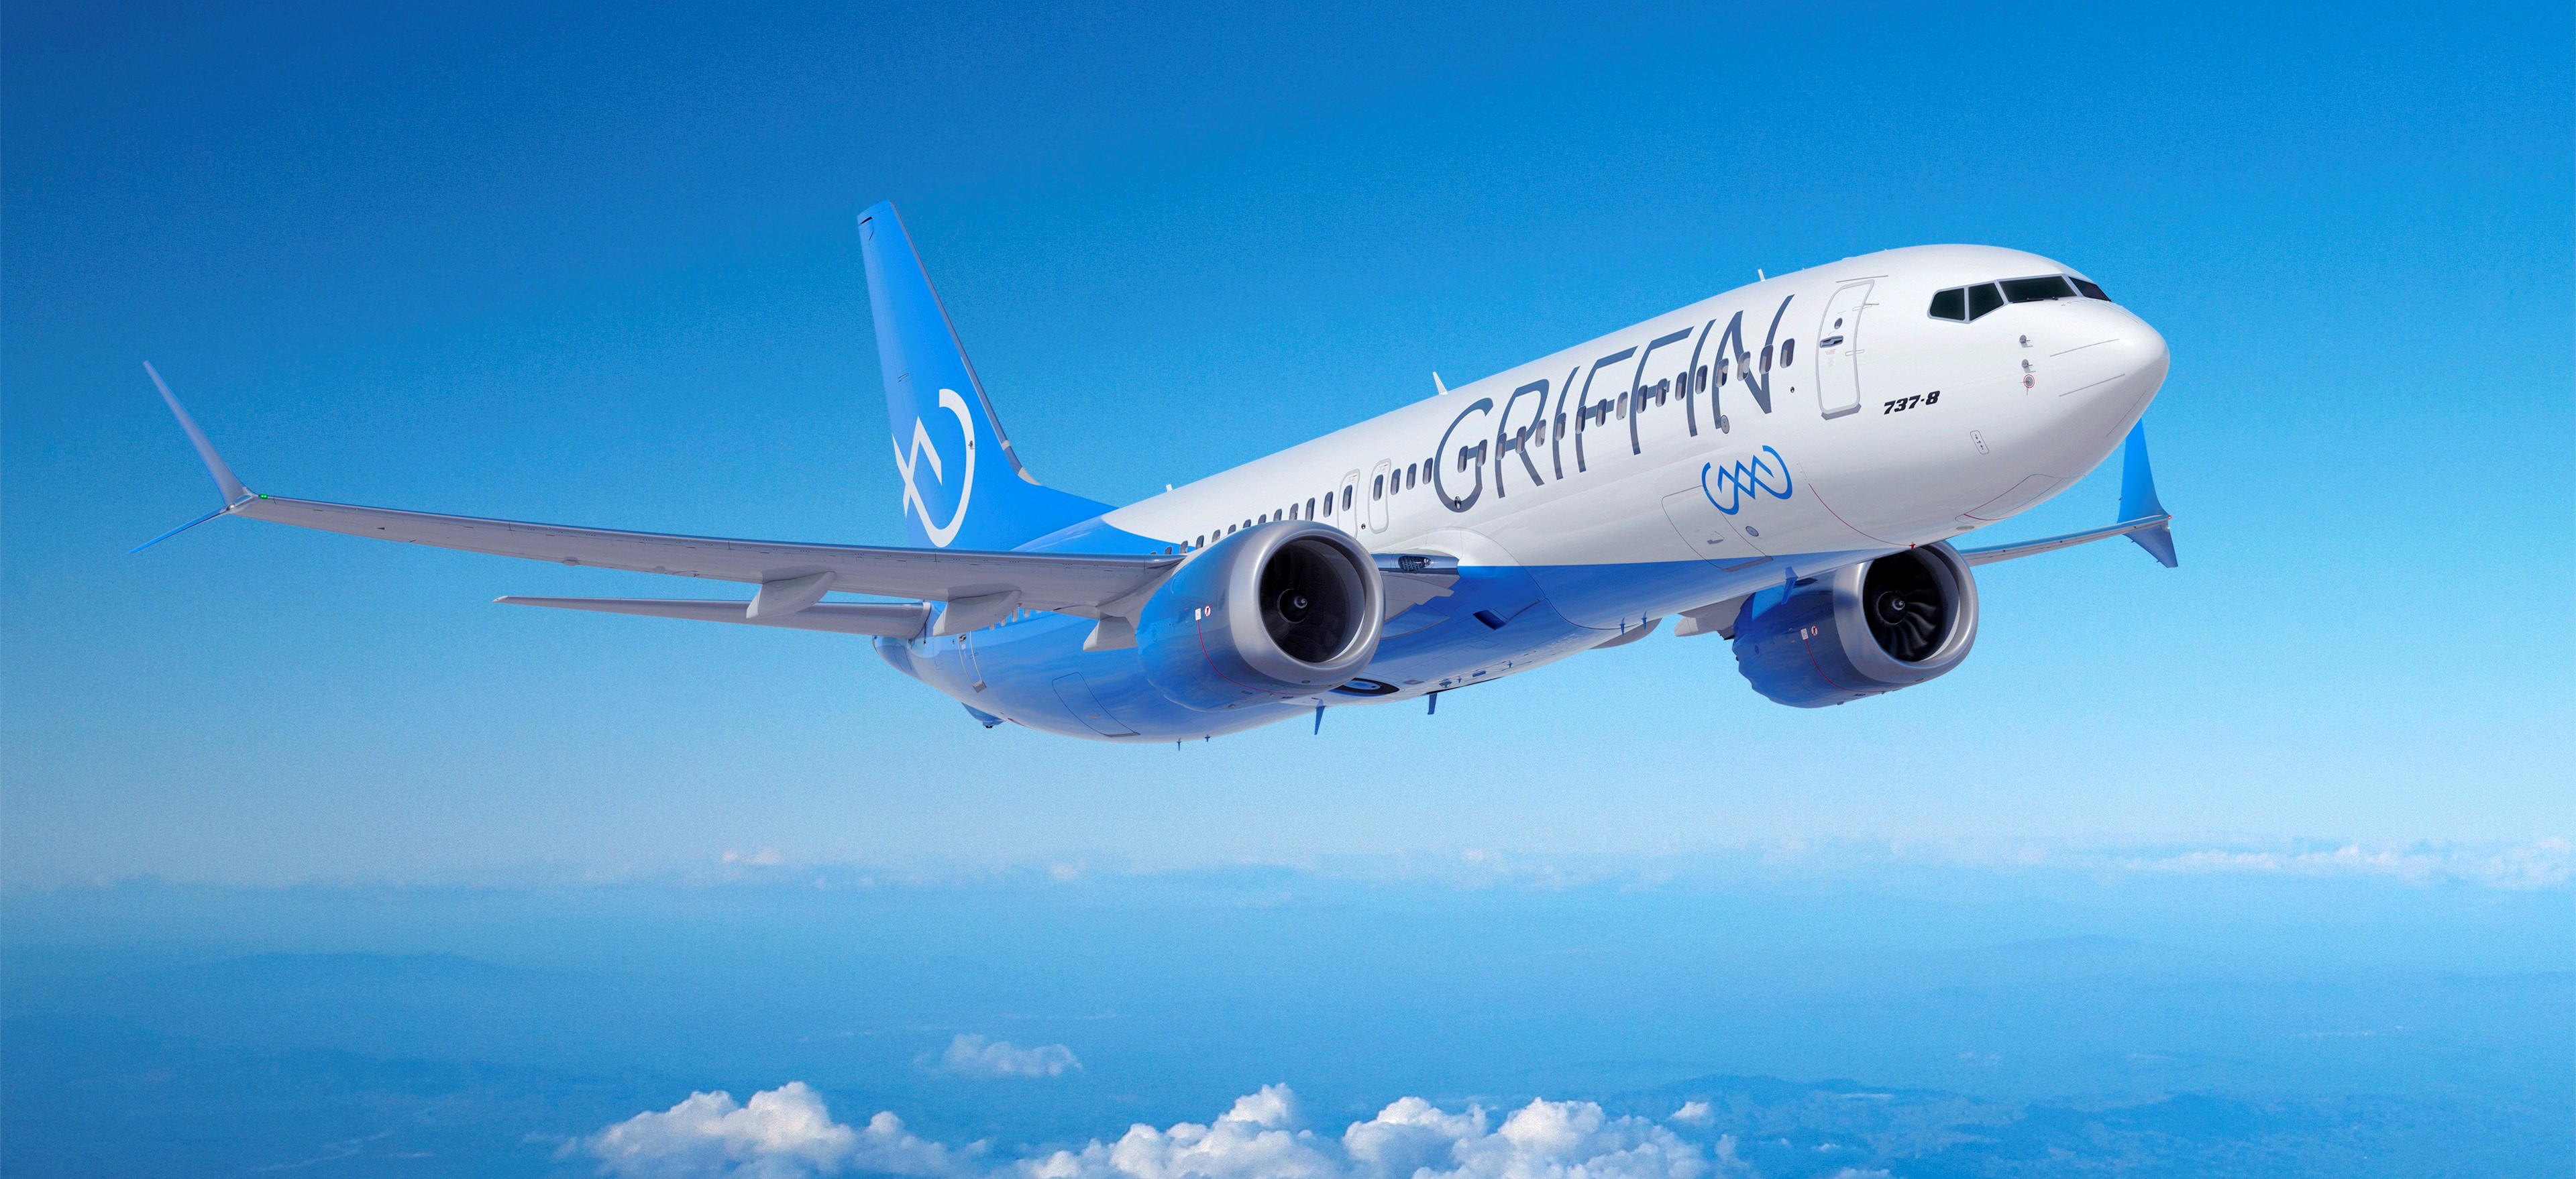 Max regaining Faith - Griffin Global Asset Management orders Five B737 Max  Aircrafts  with  Boeing  Today  !